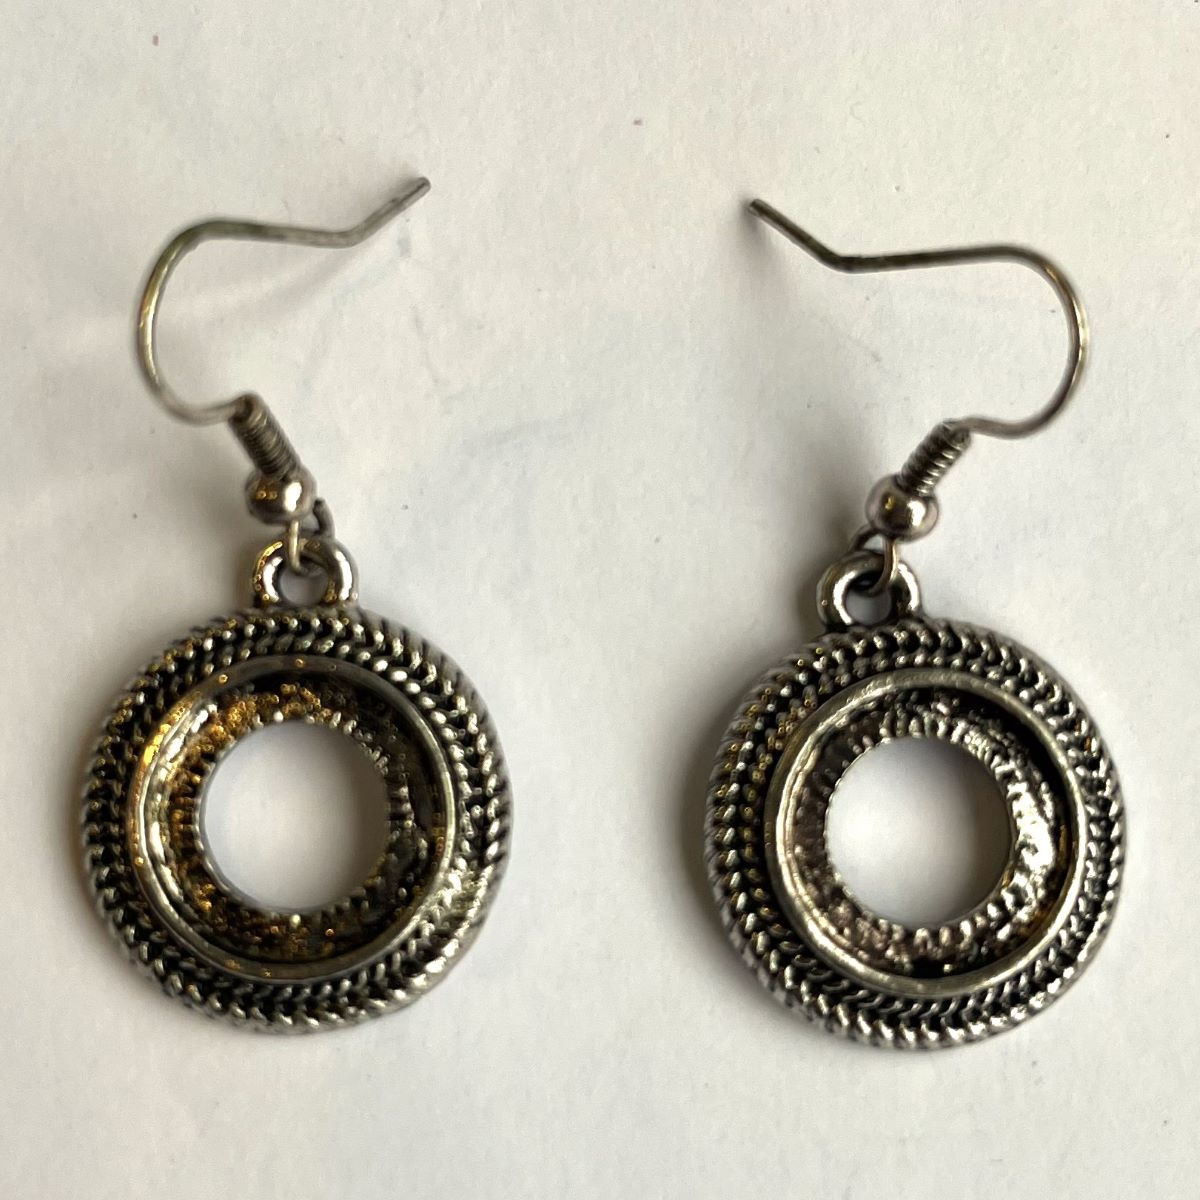 Round Hollow Bezel Earrings 20mm with Cord Design